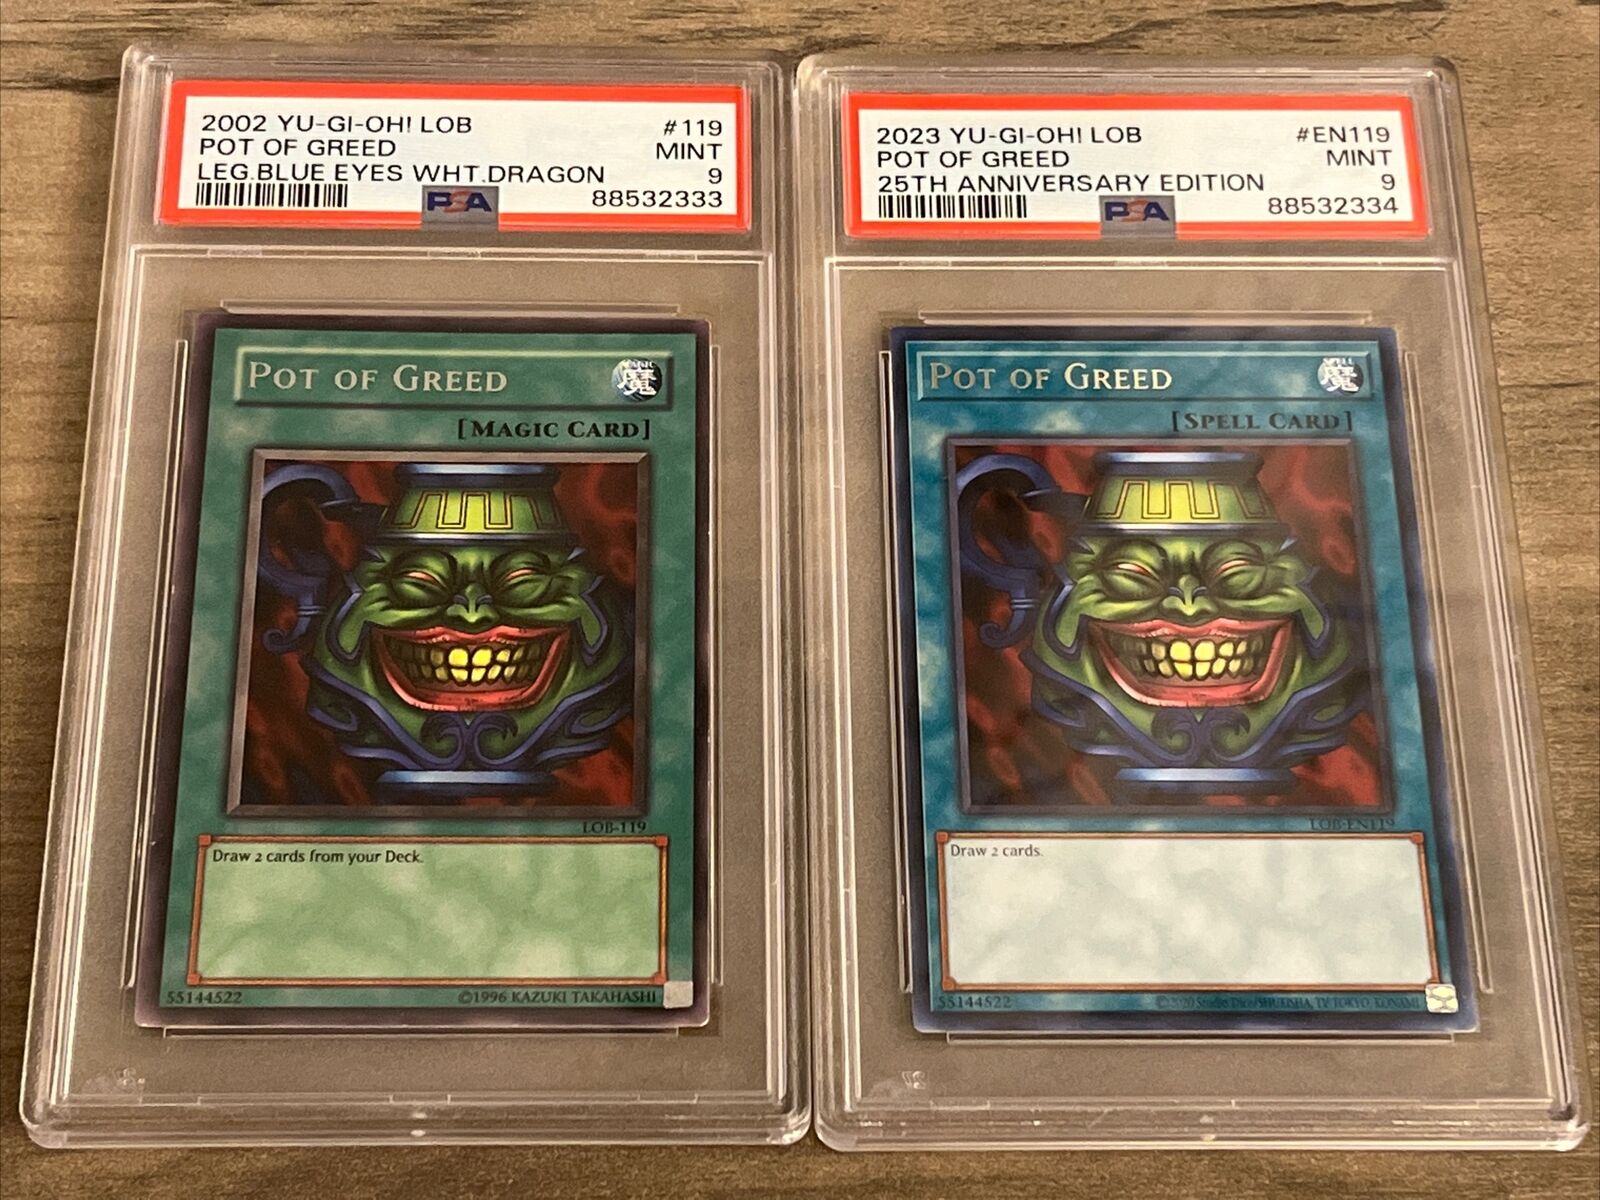 Yugioh Pot Of Greed LOB-119 & EN119 PSA 9 Lot of 2 Sequential Serial Numbered